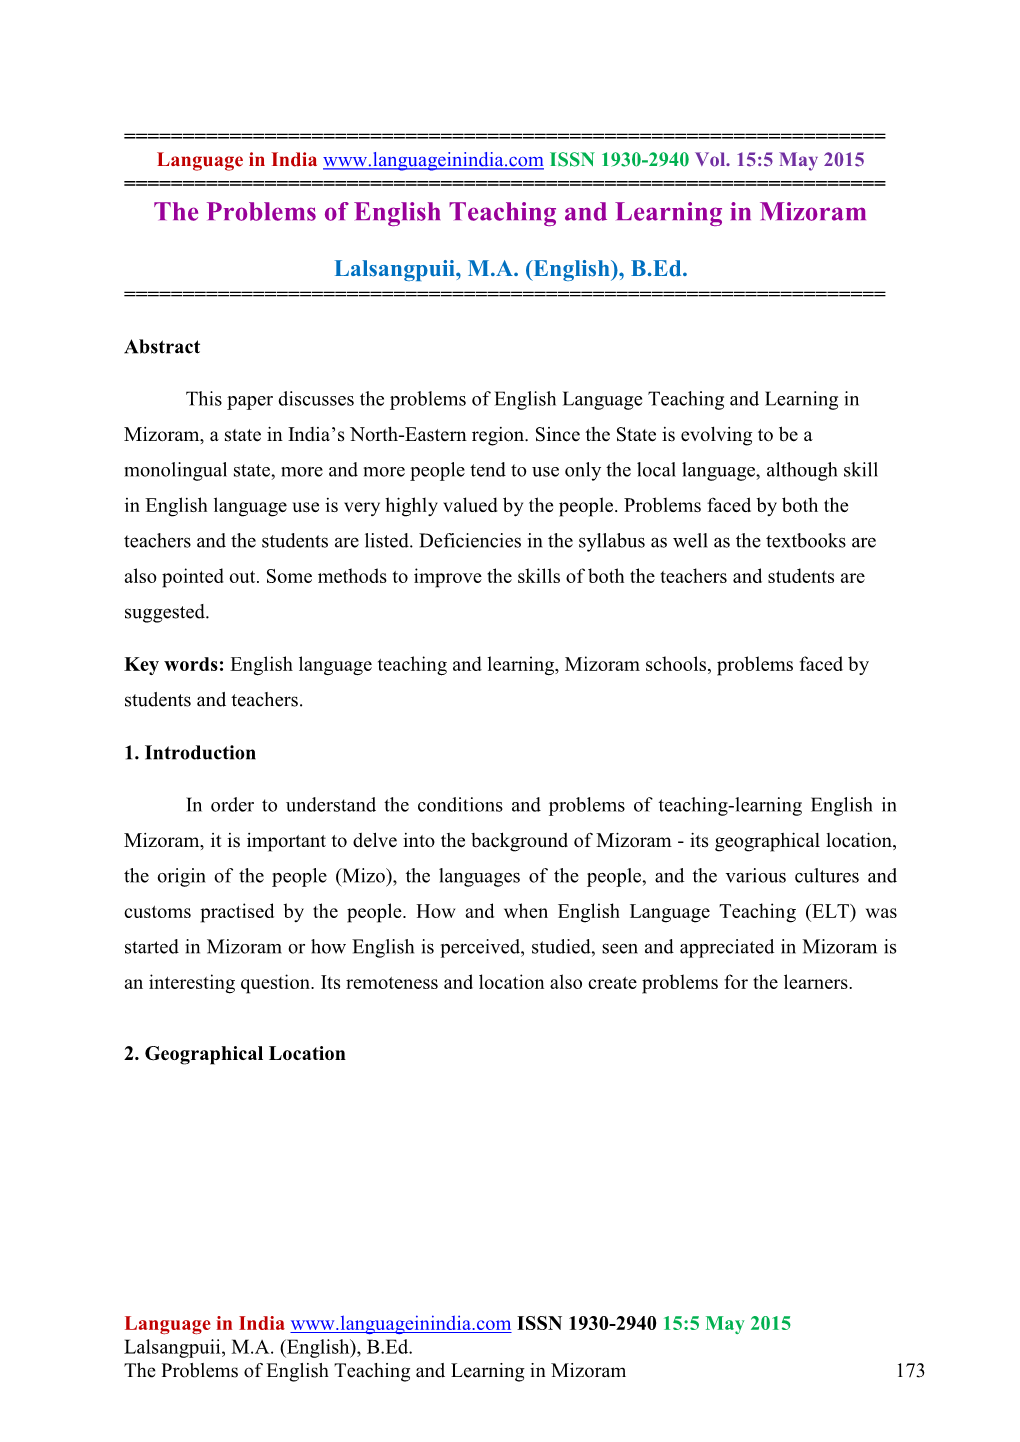 The Problems of English Teaching and Learning in Mizoram